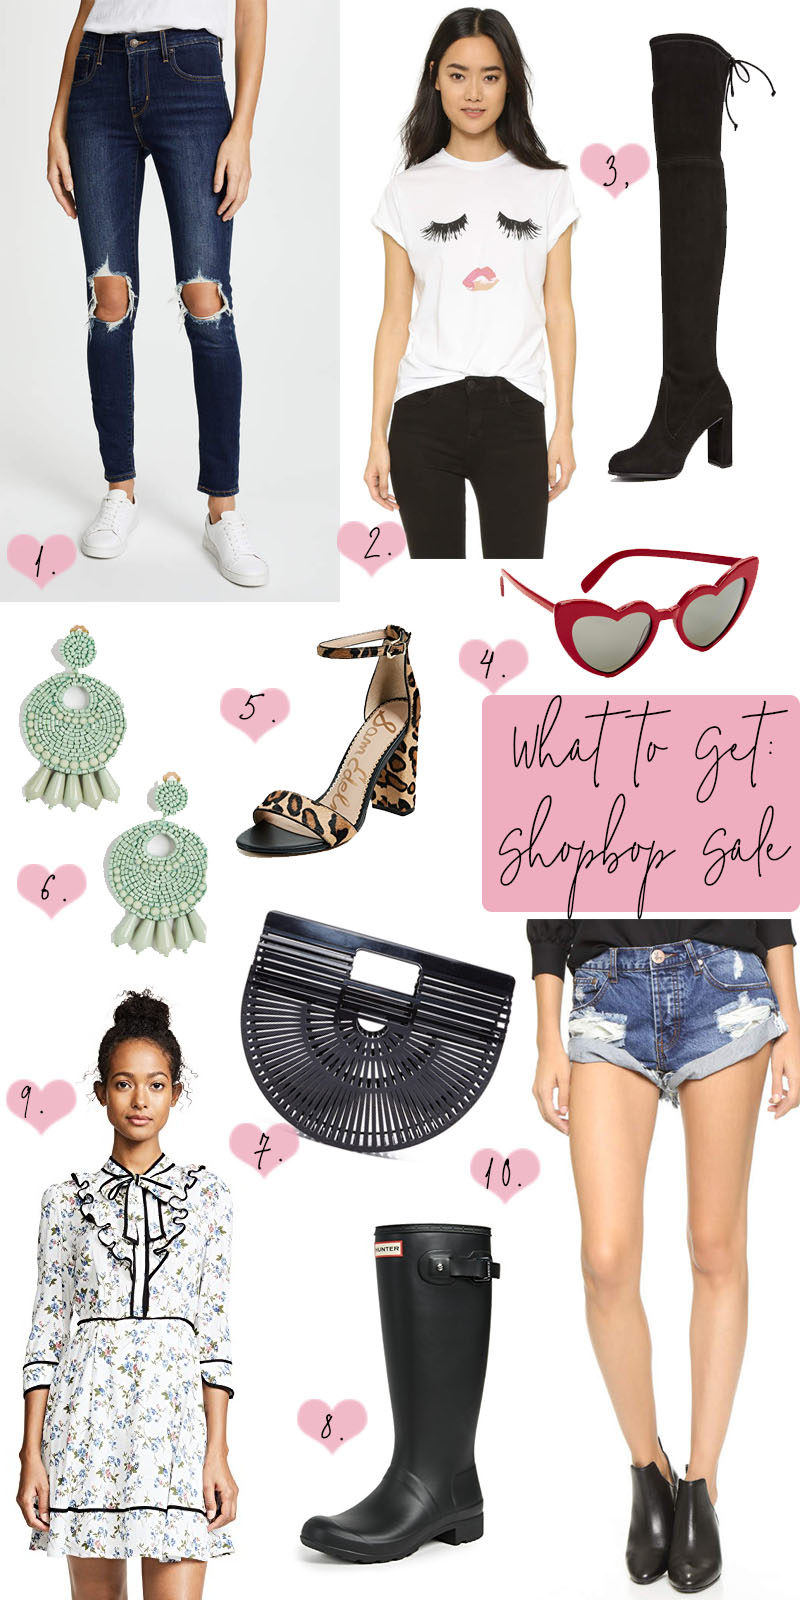 What to buy from the Shopbop sale